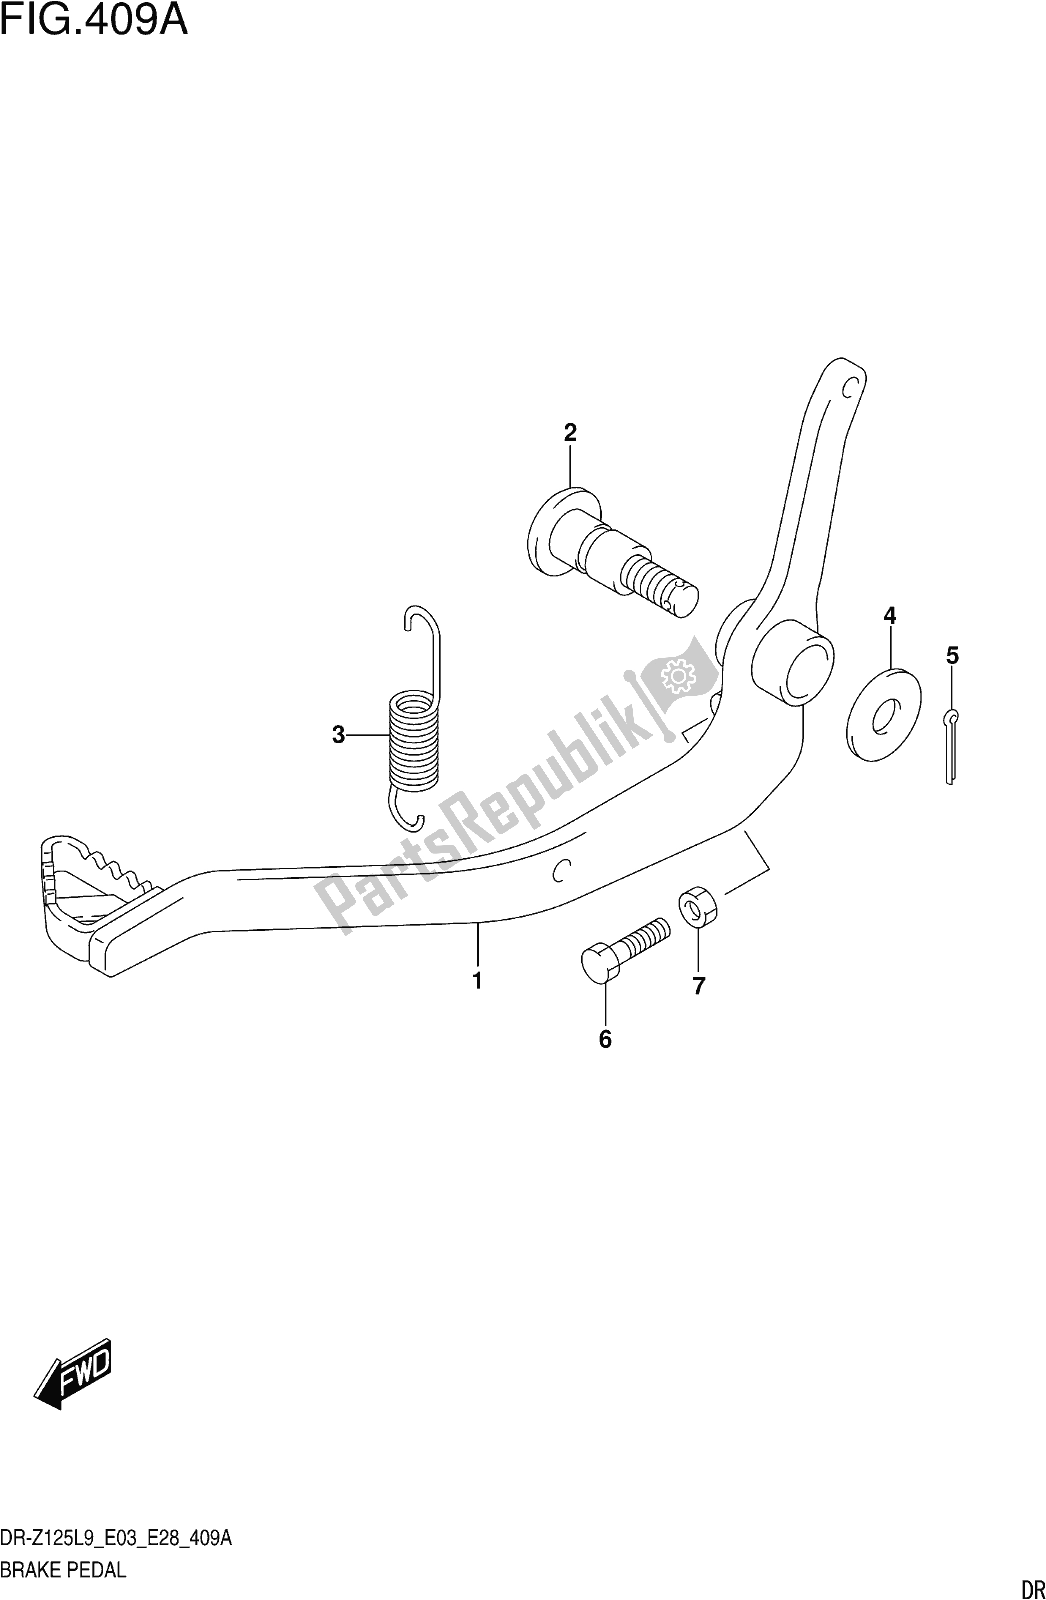 All parts for the Fig. 409a Brake Pedal of the Suzuki DR-Z 125 2019